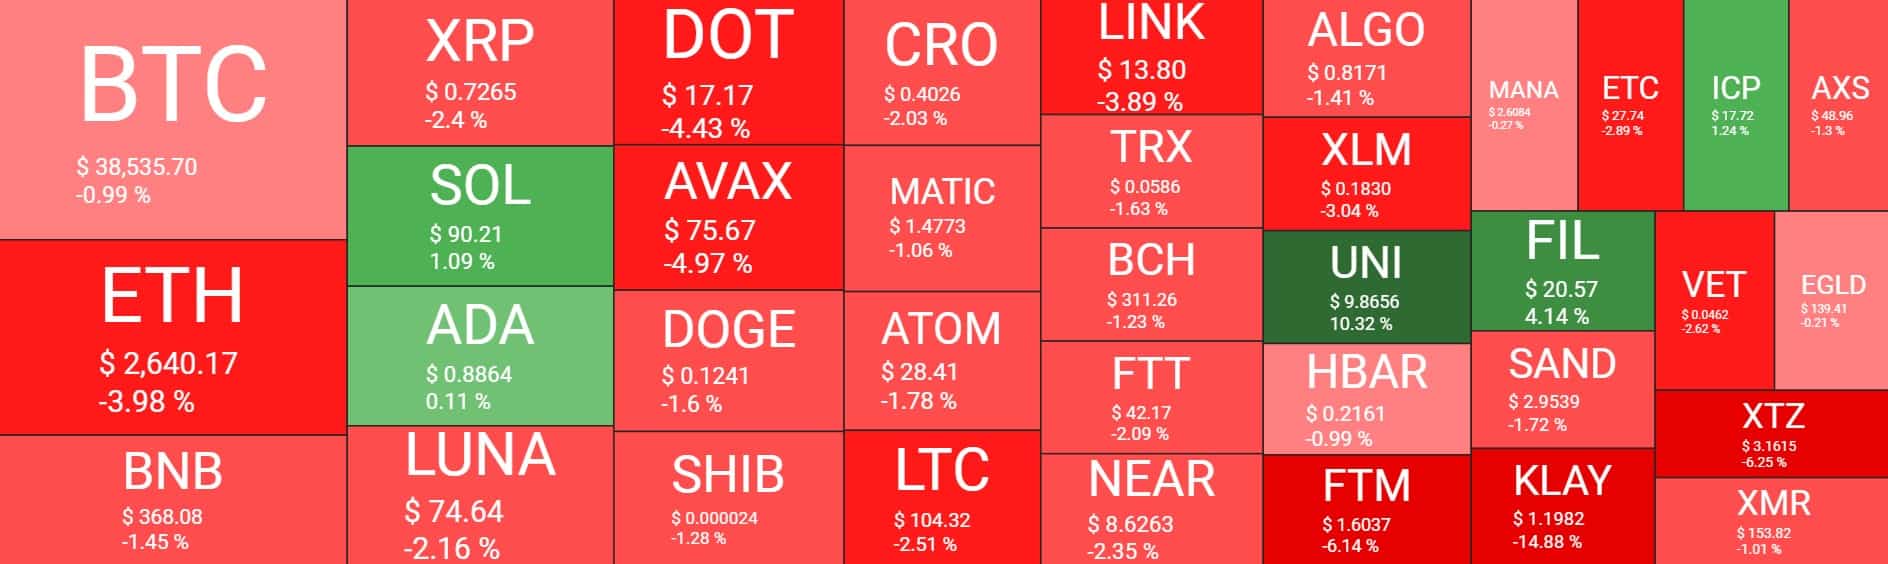 Cryptocurrency Market Overview. Source: Quantify Crypto